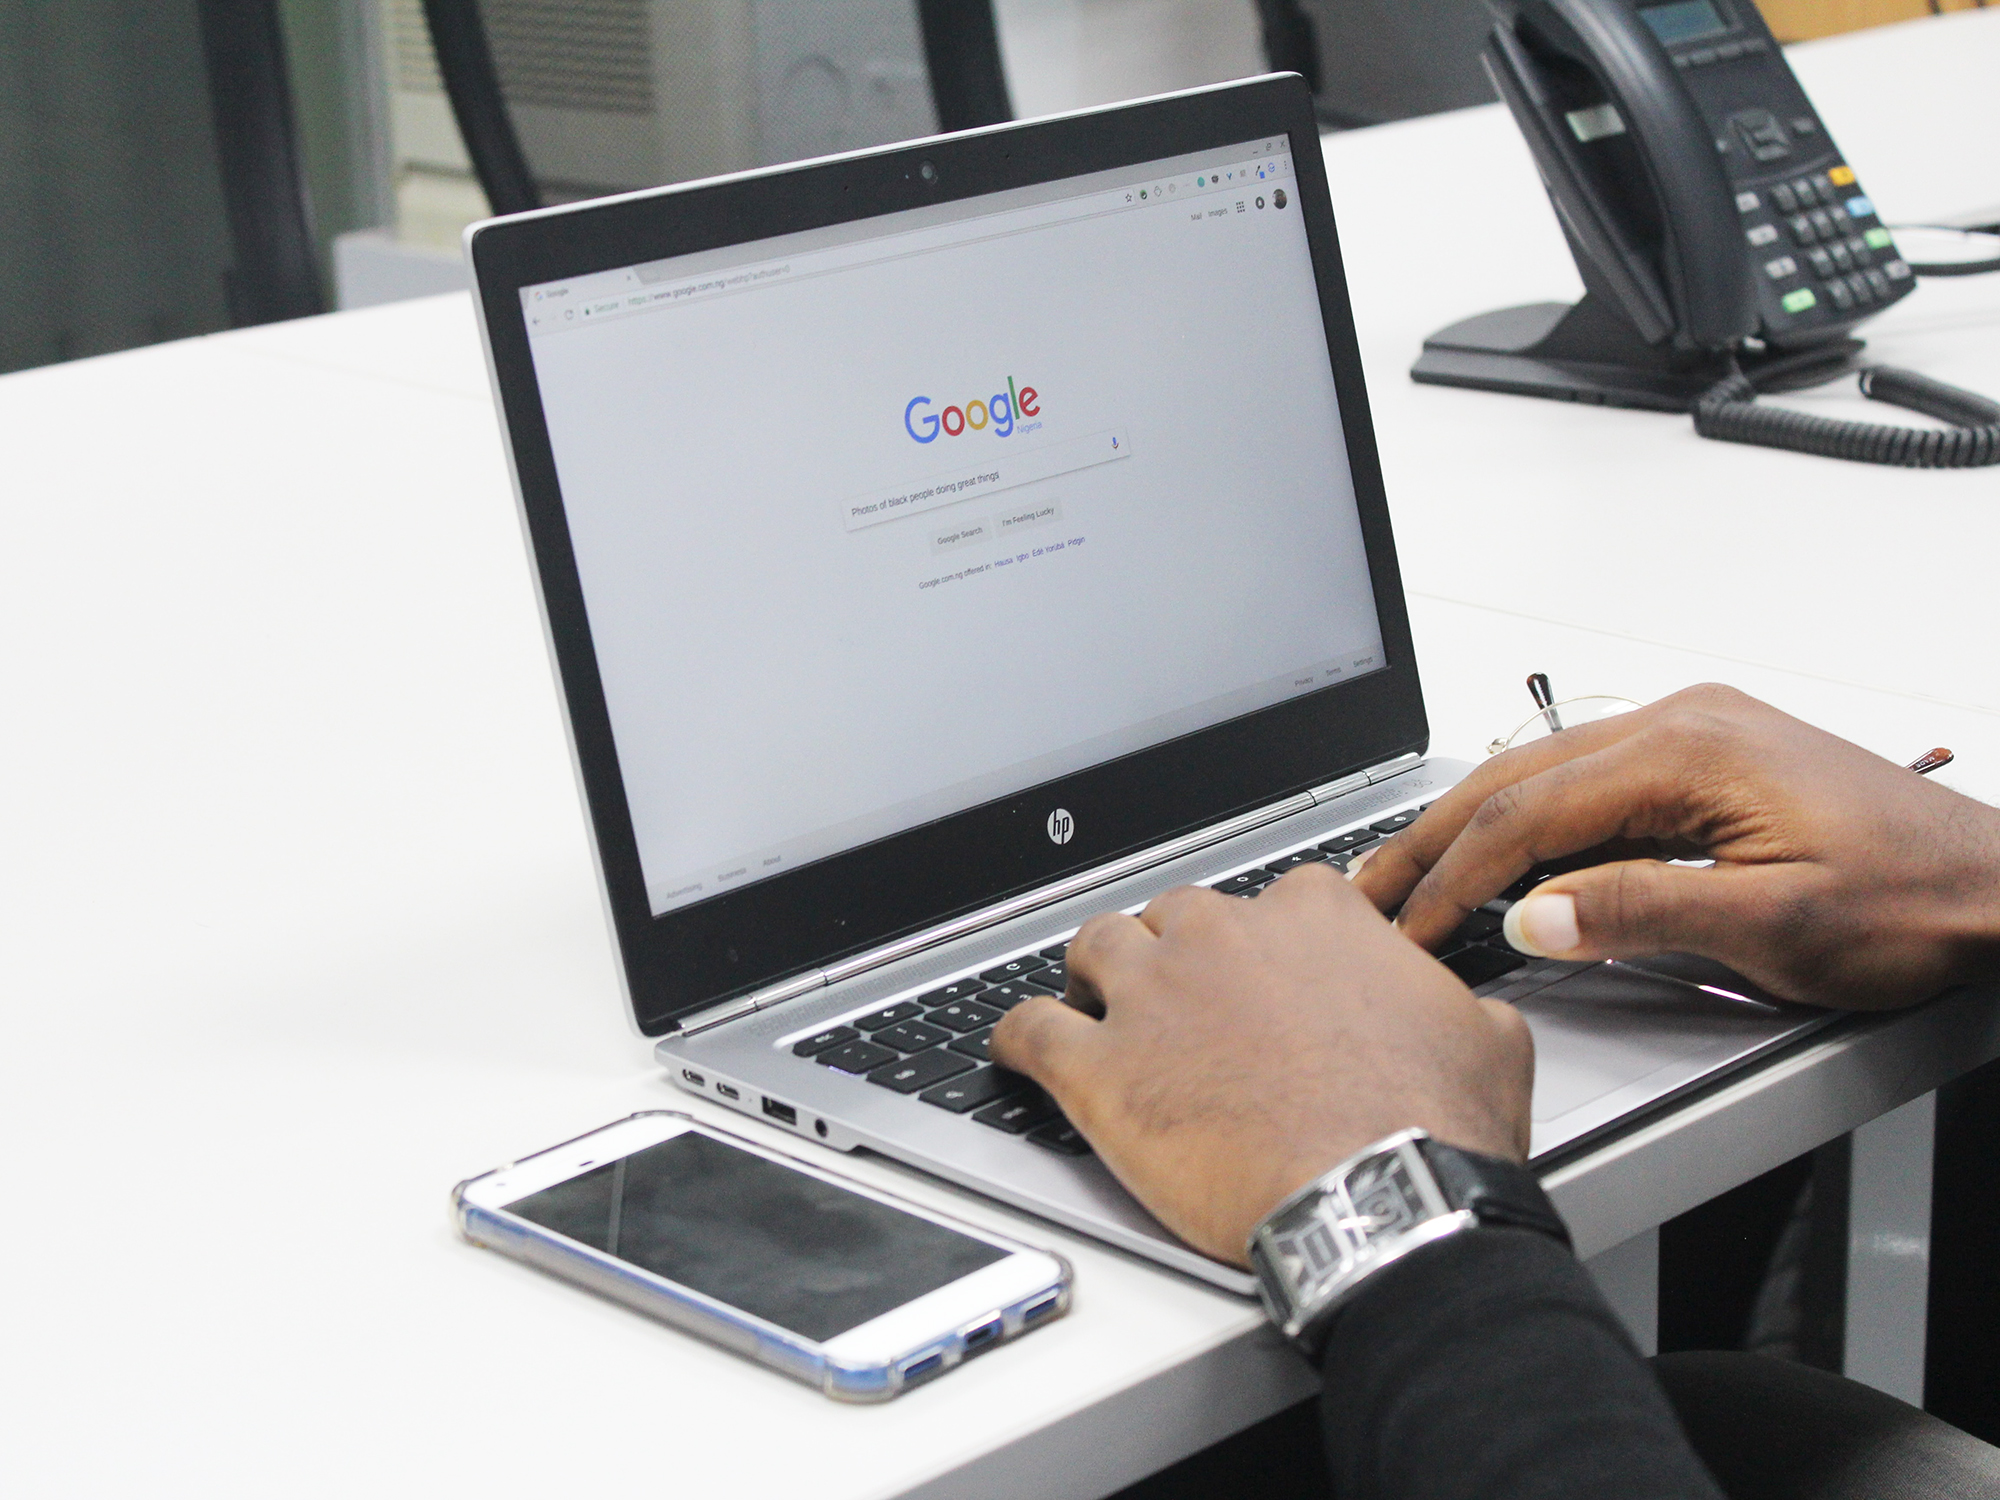 A person using a laptop computer with Google on the screen.